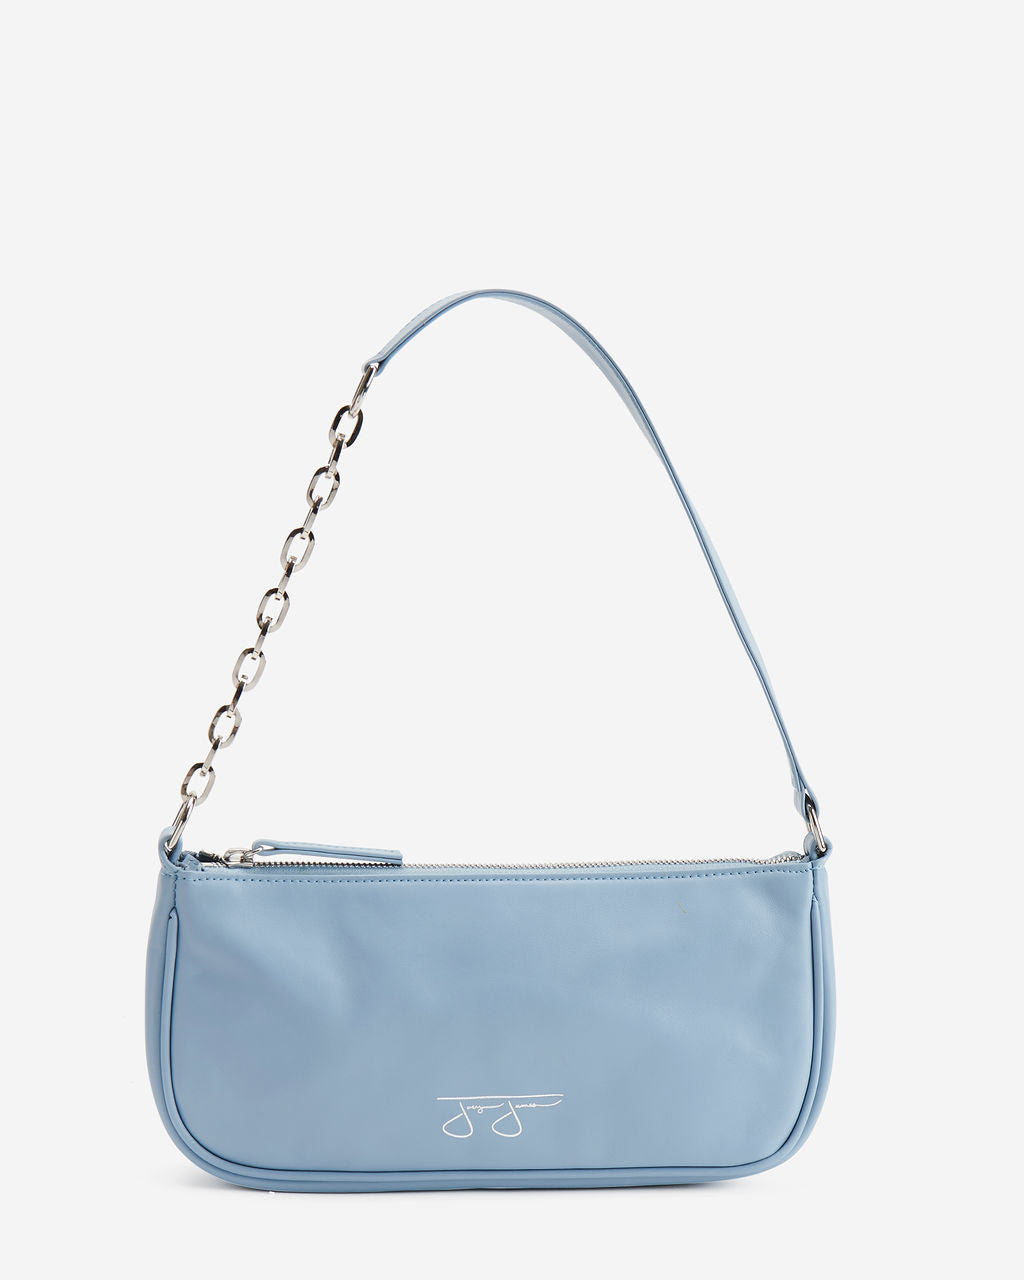 Lucy Bag - Light Blue  Joey James, The Label   